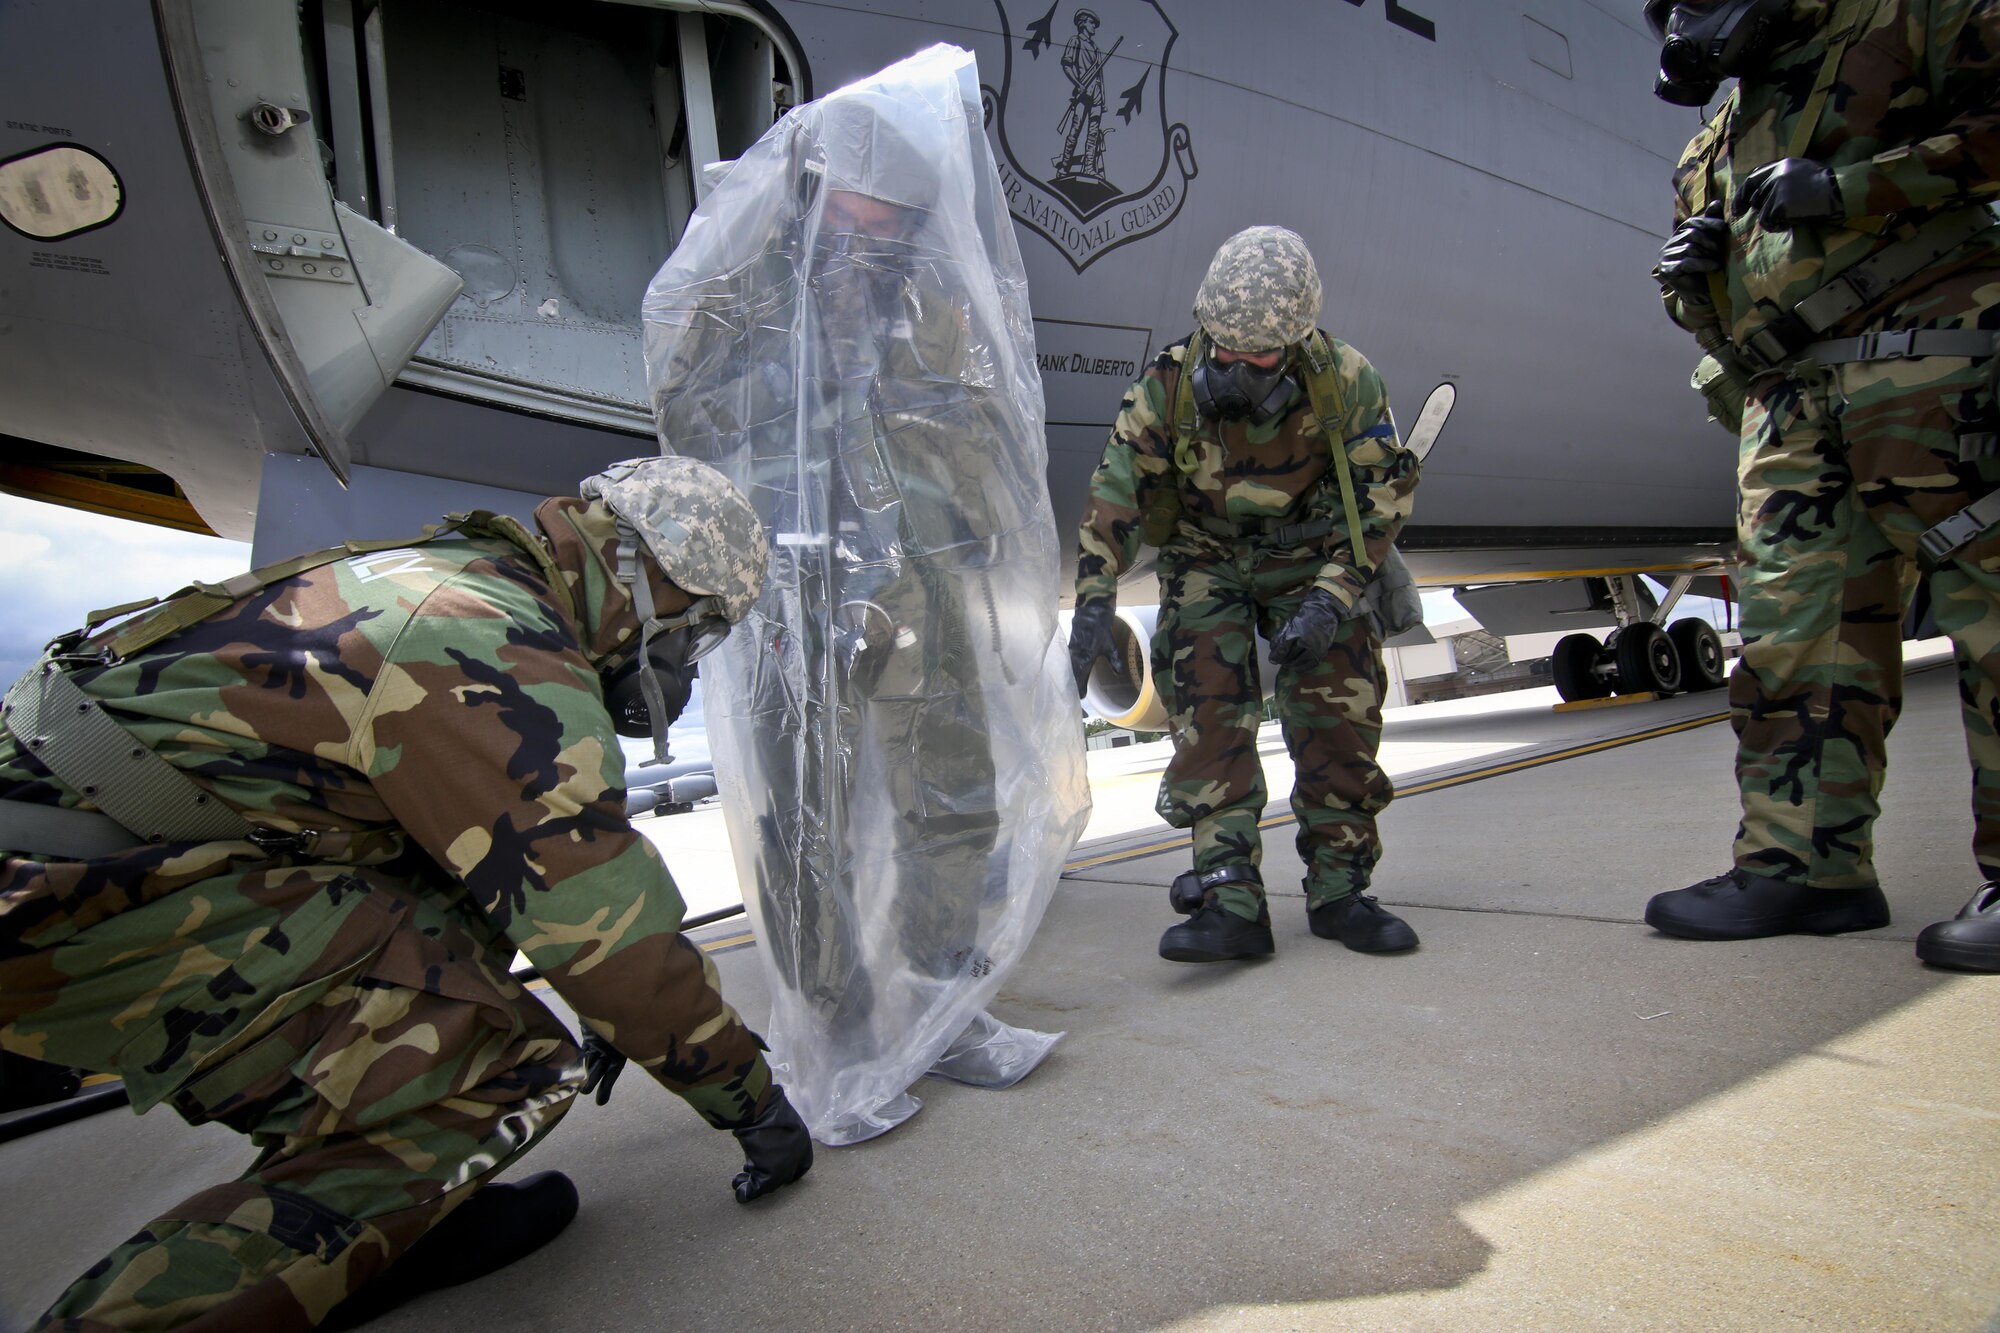 U.S. Air Force maintenance airmen from the New Jersey Air National Guard's 108th Wing place 1st Lt. Beau Deleon into a protective covering during an exercise at Joint Base McGuire-Dix-Lakehurst, N.J., June 7, 2017. Deleon is a KC-135 Stratotanker pilot with the 141st Air Refueling Squadron. (U.S. Air National Guard photo by Master Sgt. Matt Hecht/Released)